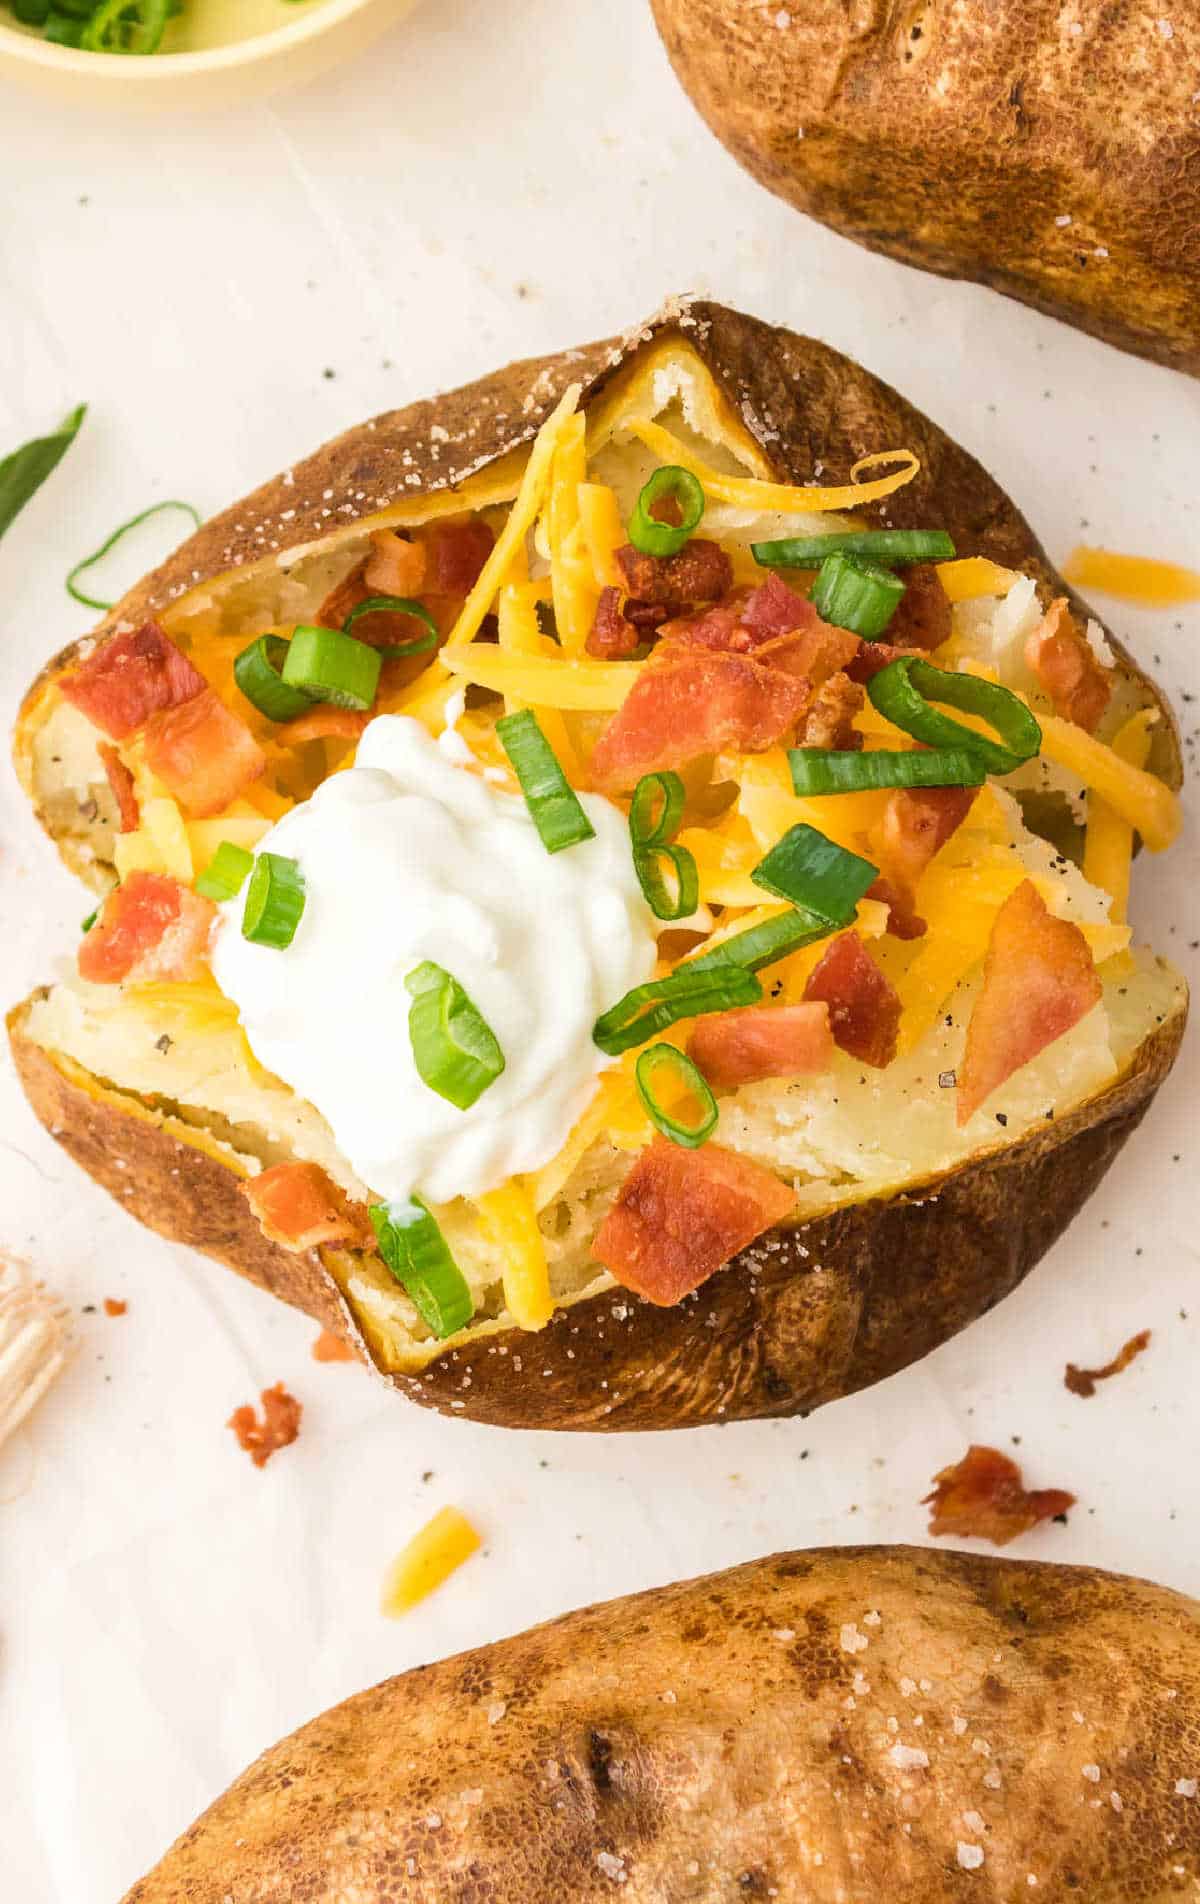 A baked potato loaded with butter, cheese, sour cream and bacon.